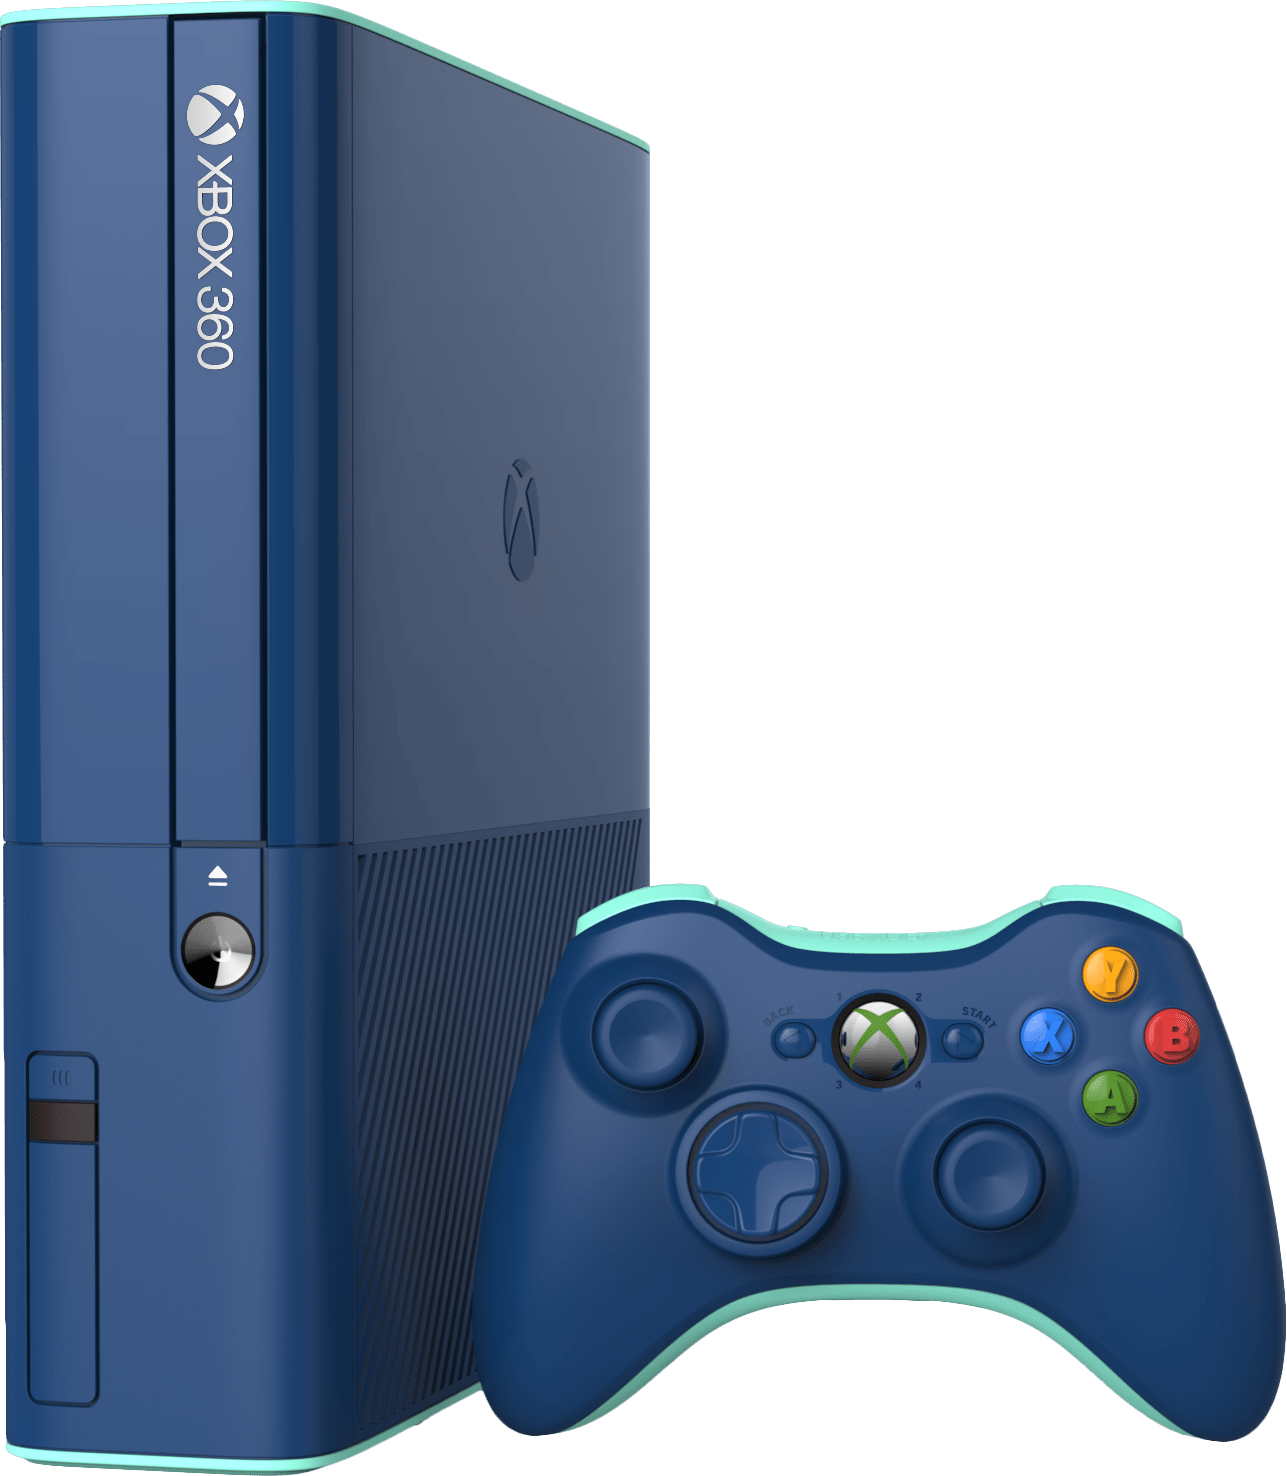 Xbox 360 E Special Edition Blue/Teal 500GB Console [European Import] (Xbox 360)